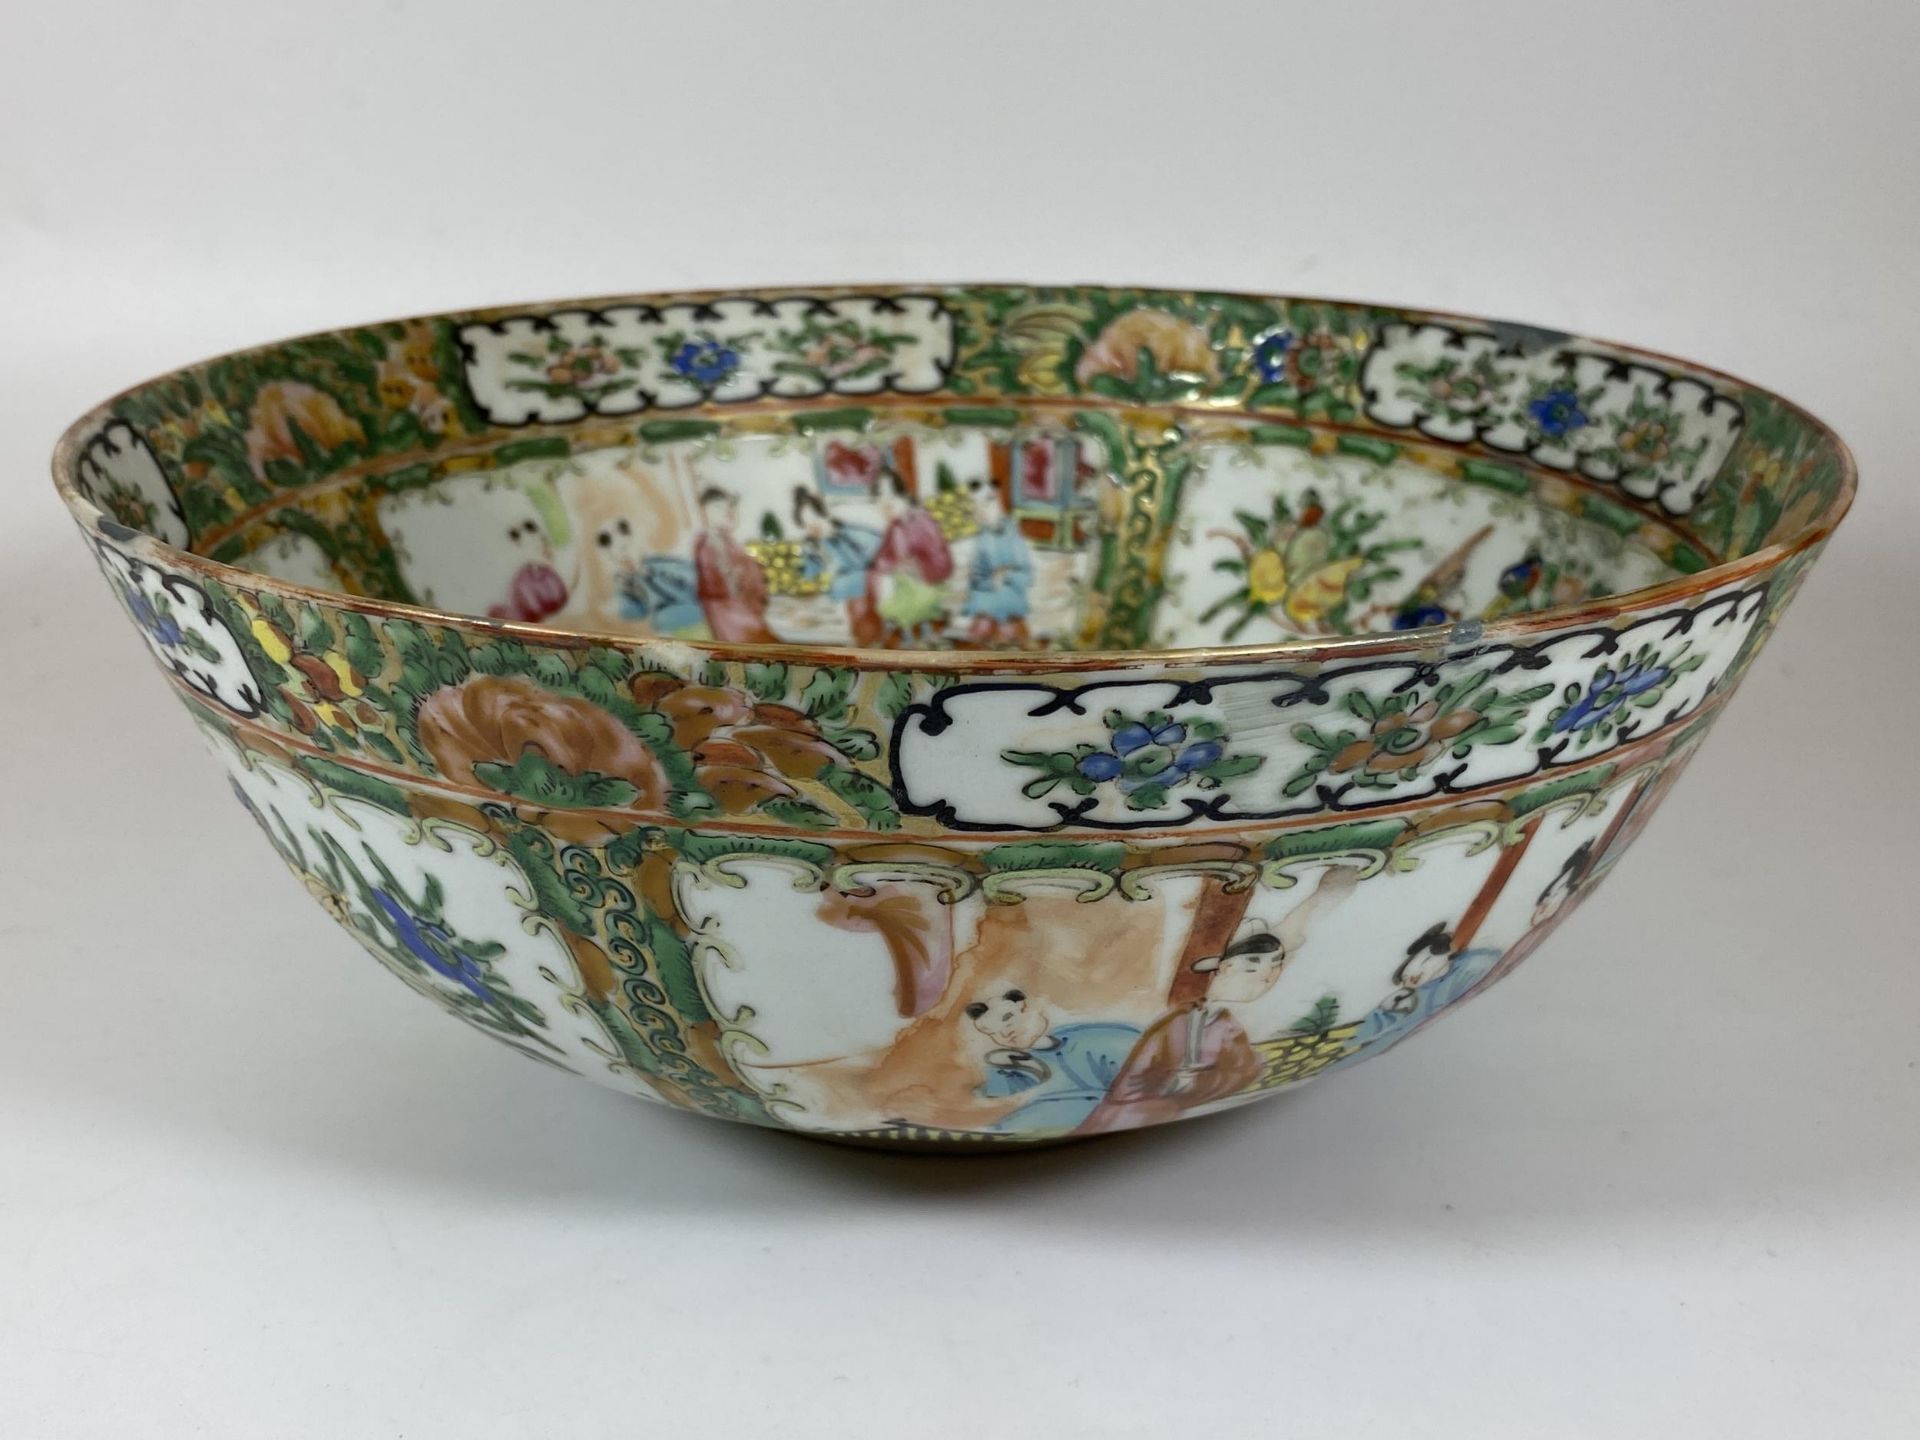 A 19TH CENTURY CHINESE CANTON FAMILLE ROSE MEDALLION FRUIT BOWL, DIAMETER 26CM, HEIGHT 10CM - Image 6 of 9